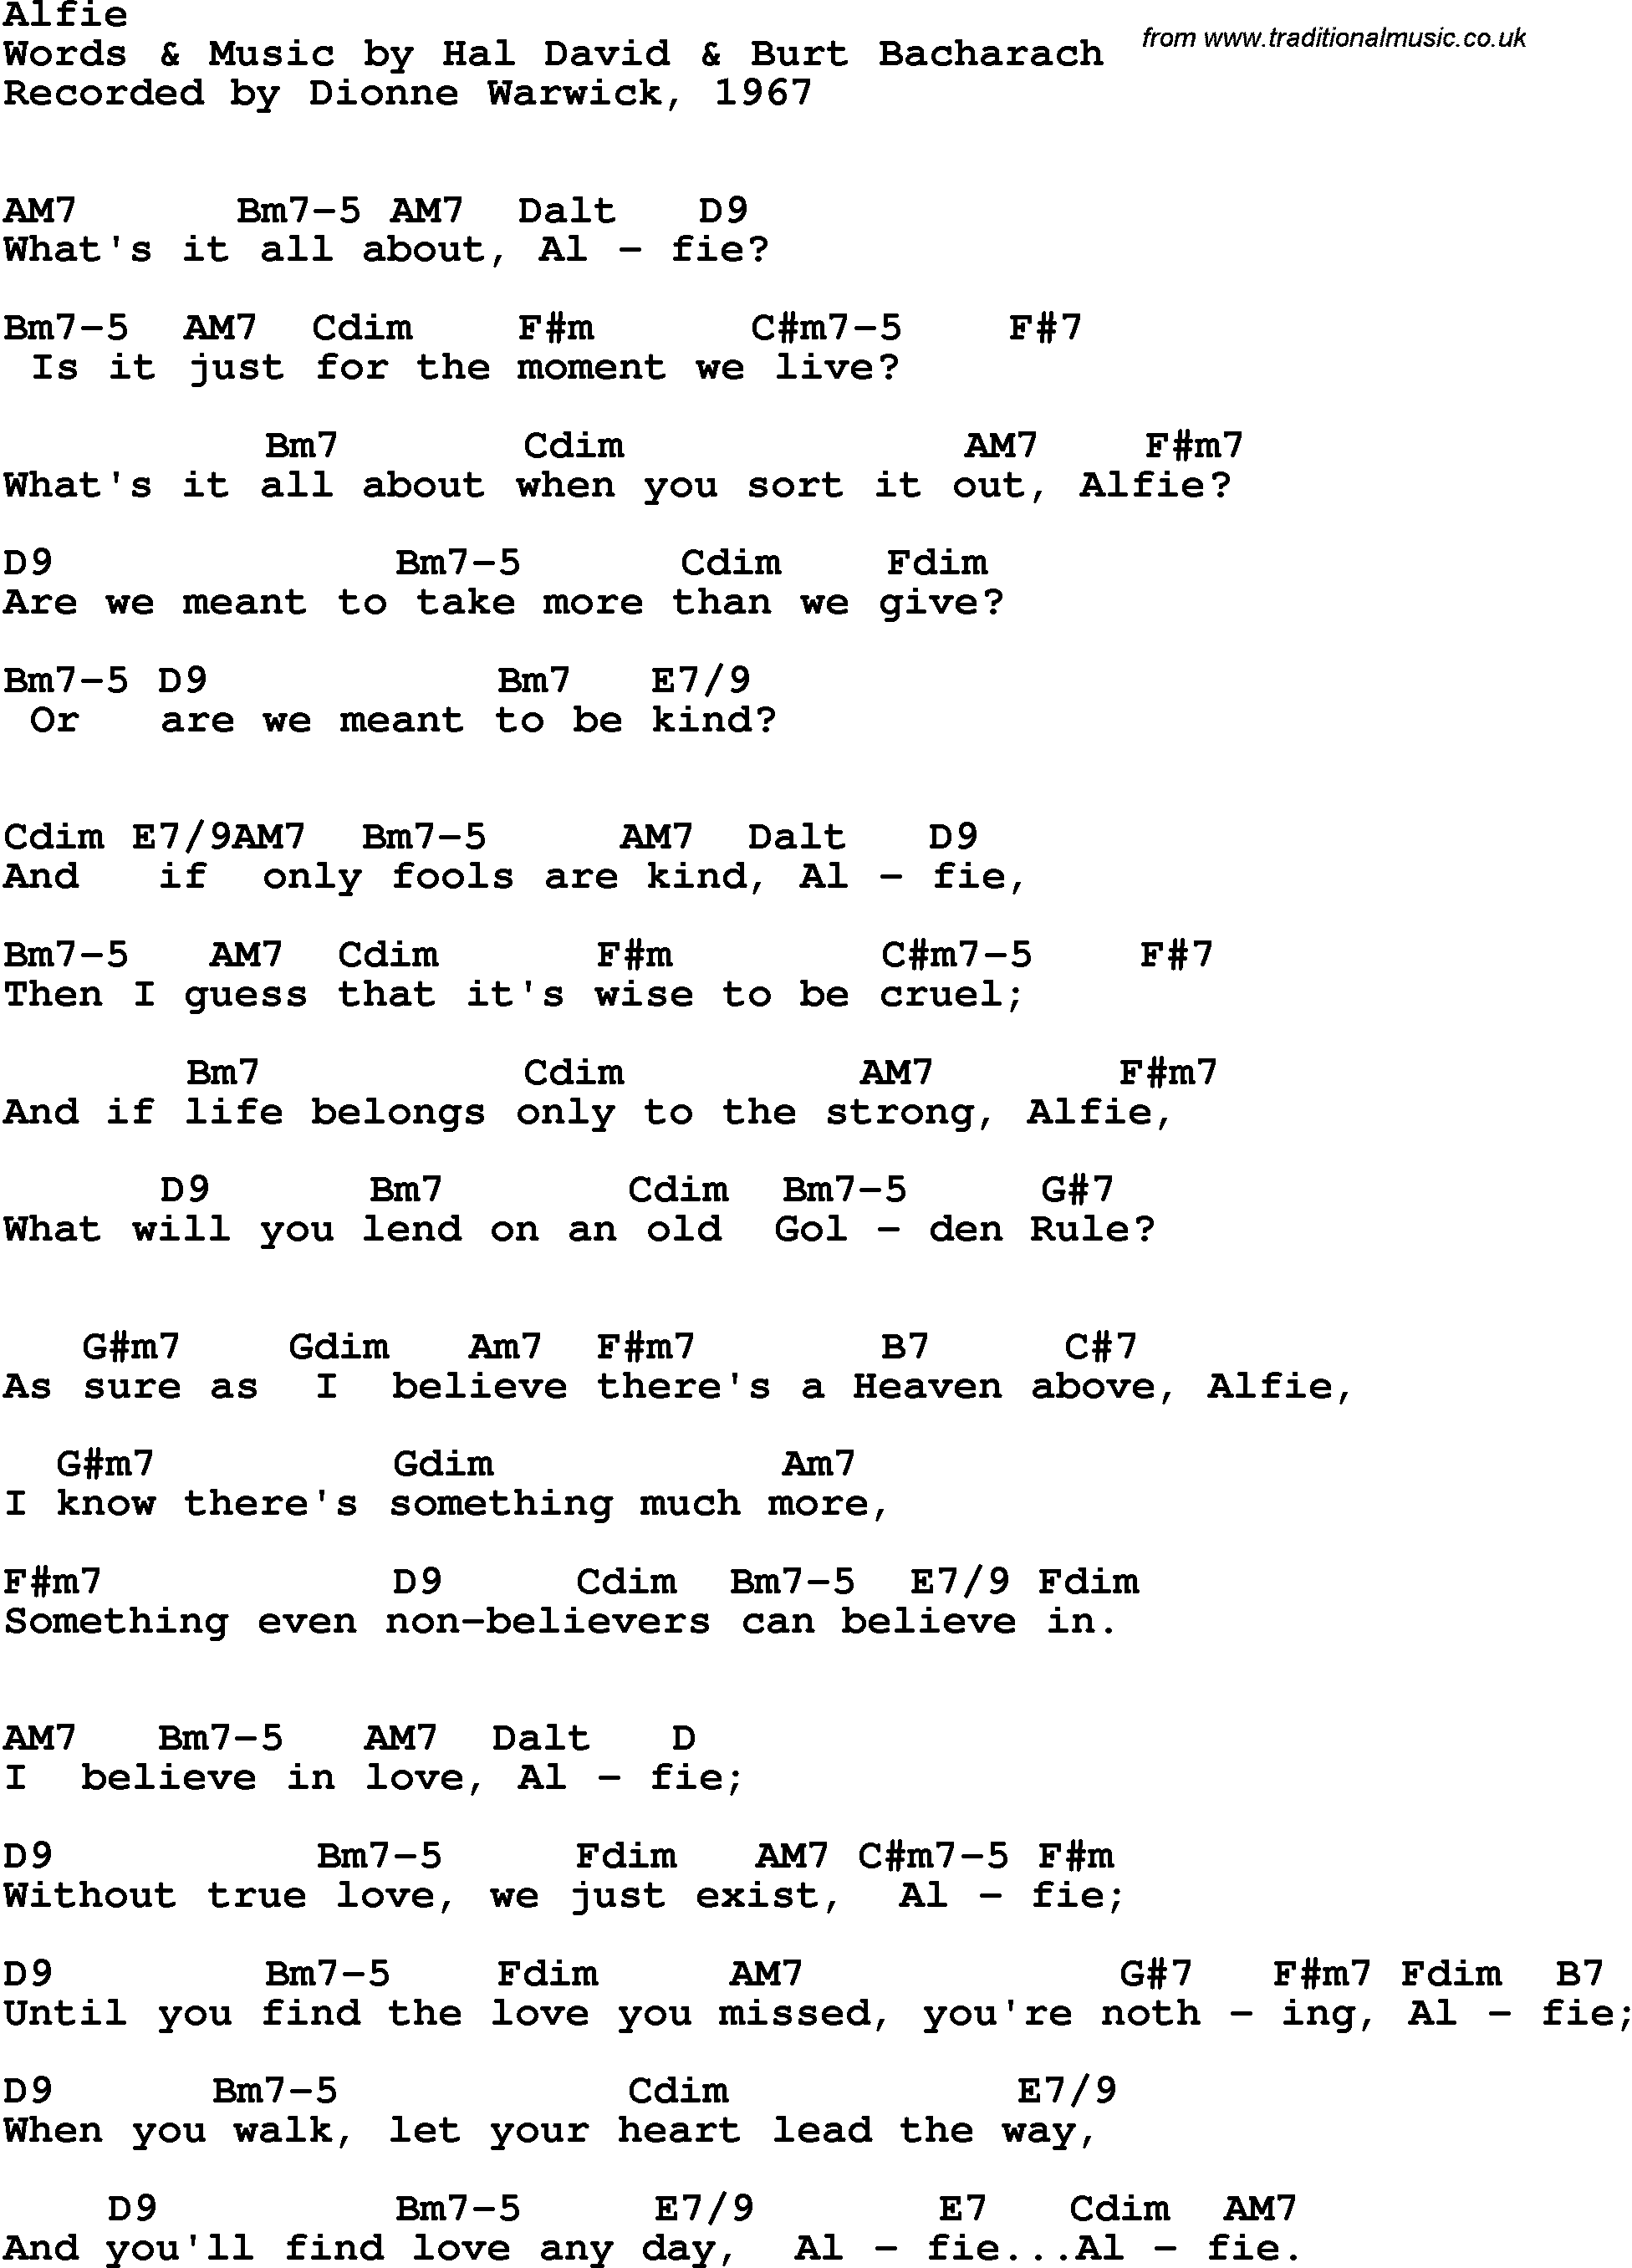 Song Lyrics with guitar chords for Alfie - Dionne Warwick, 1967